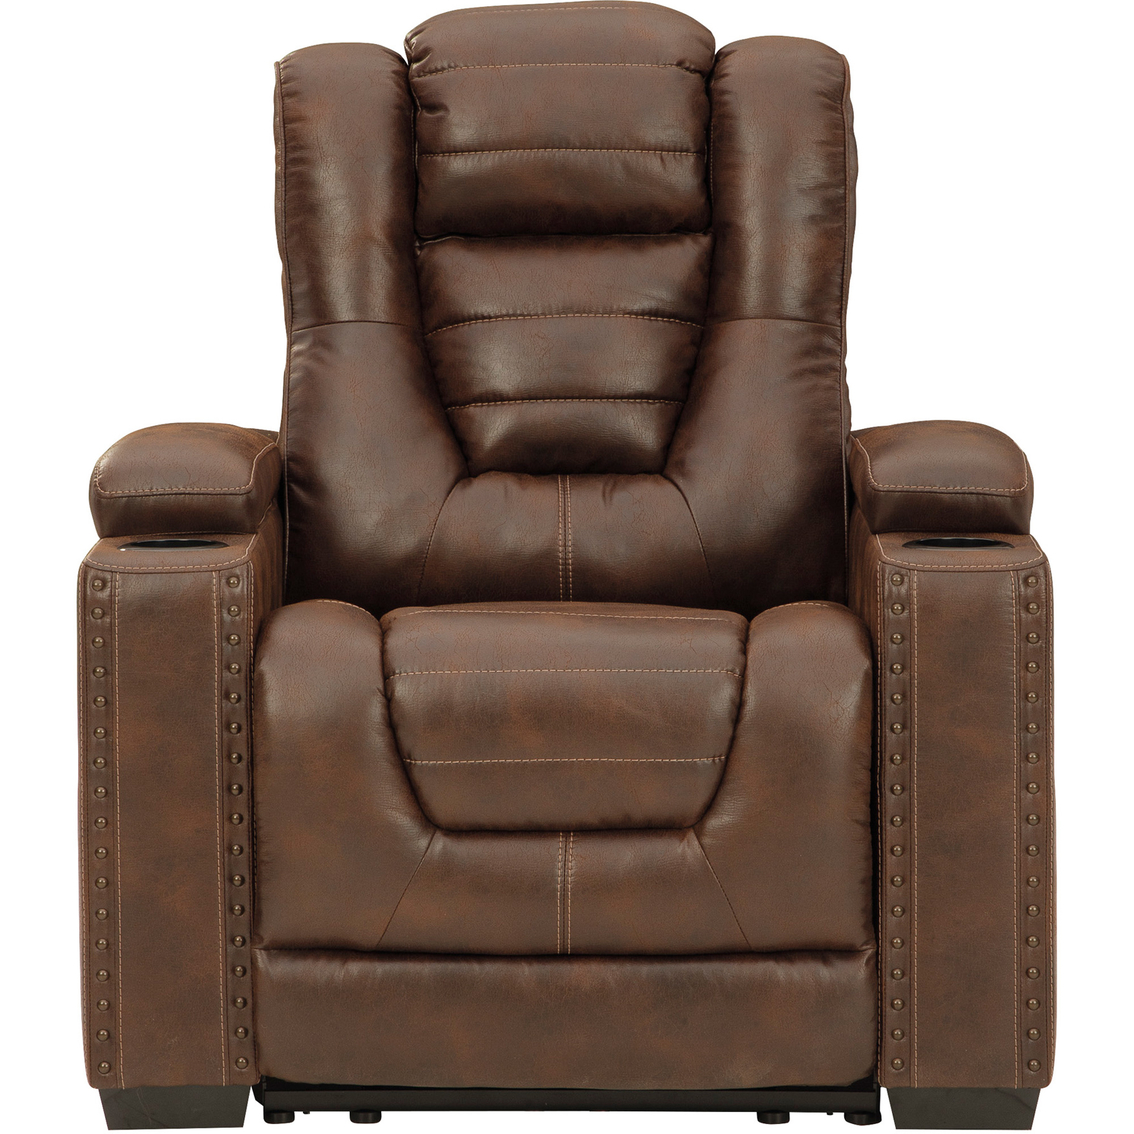 Signature Design by Ashley Owner's Box Power Recliner with Adjustable Headrest - Image 3 of 10